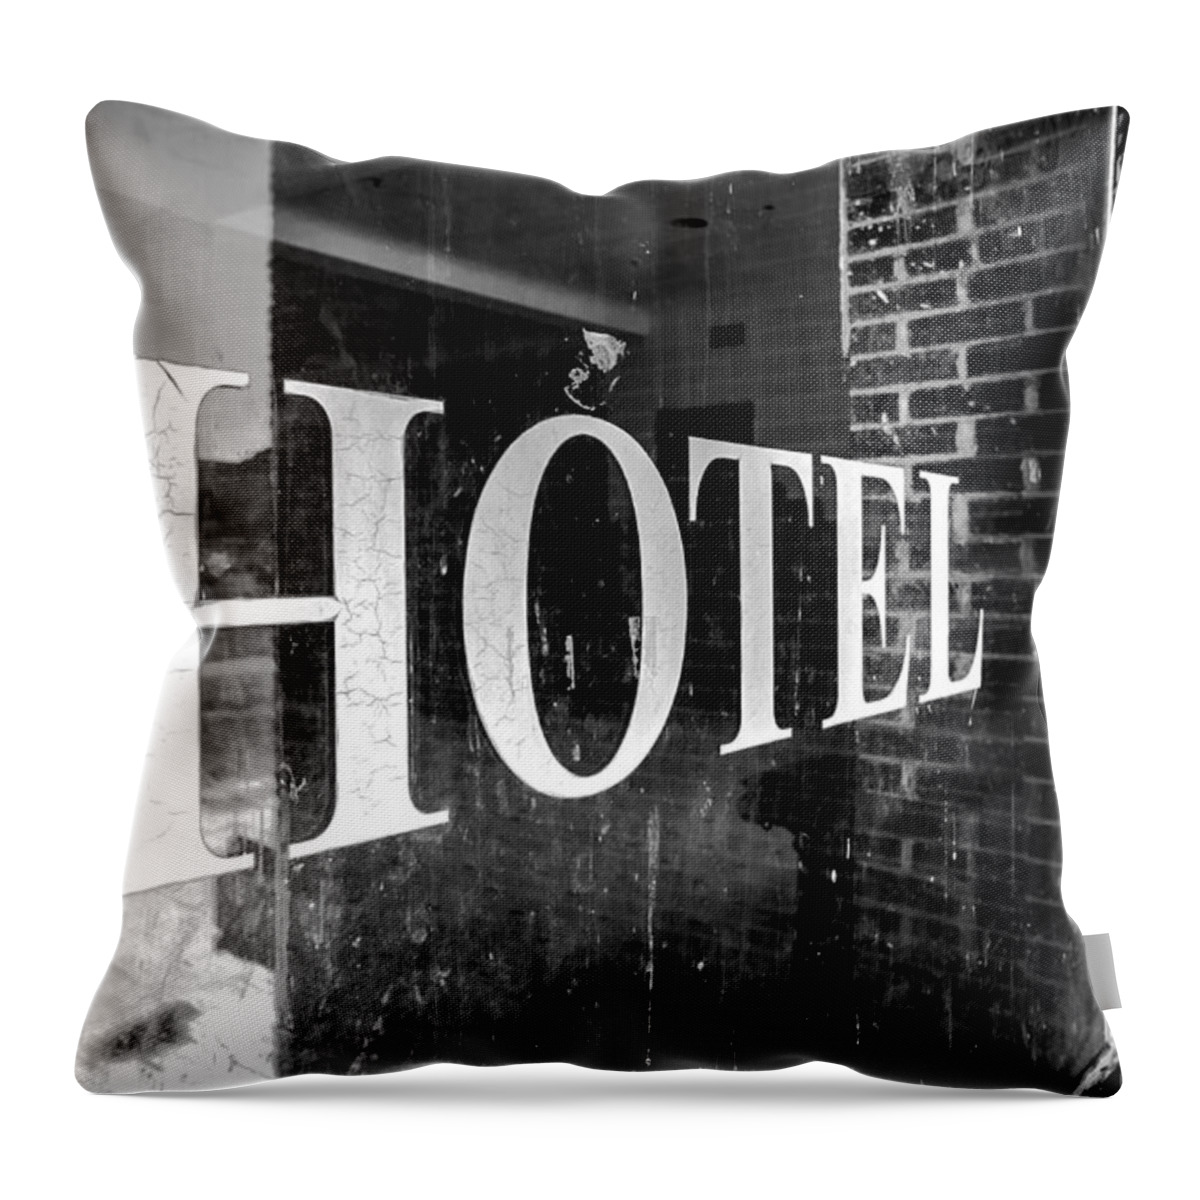 Abandoned Throw Pillow featuring the photograph Goldfield Hotel Window by Cat Connor